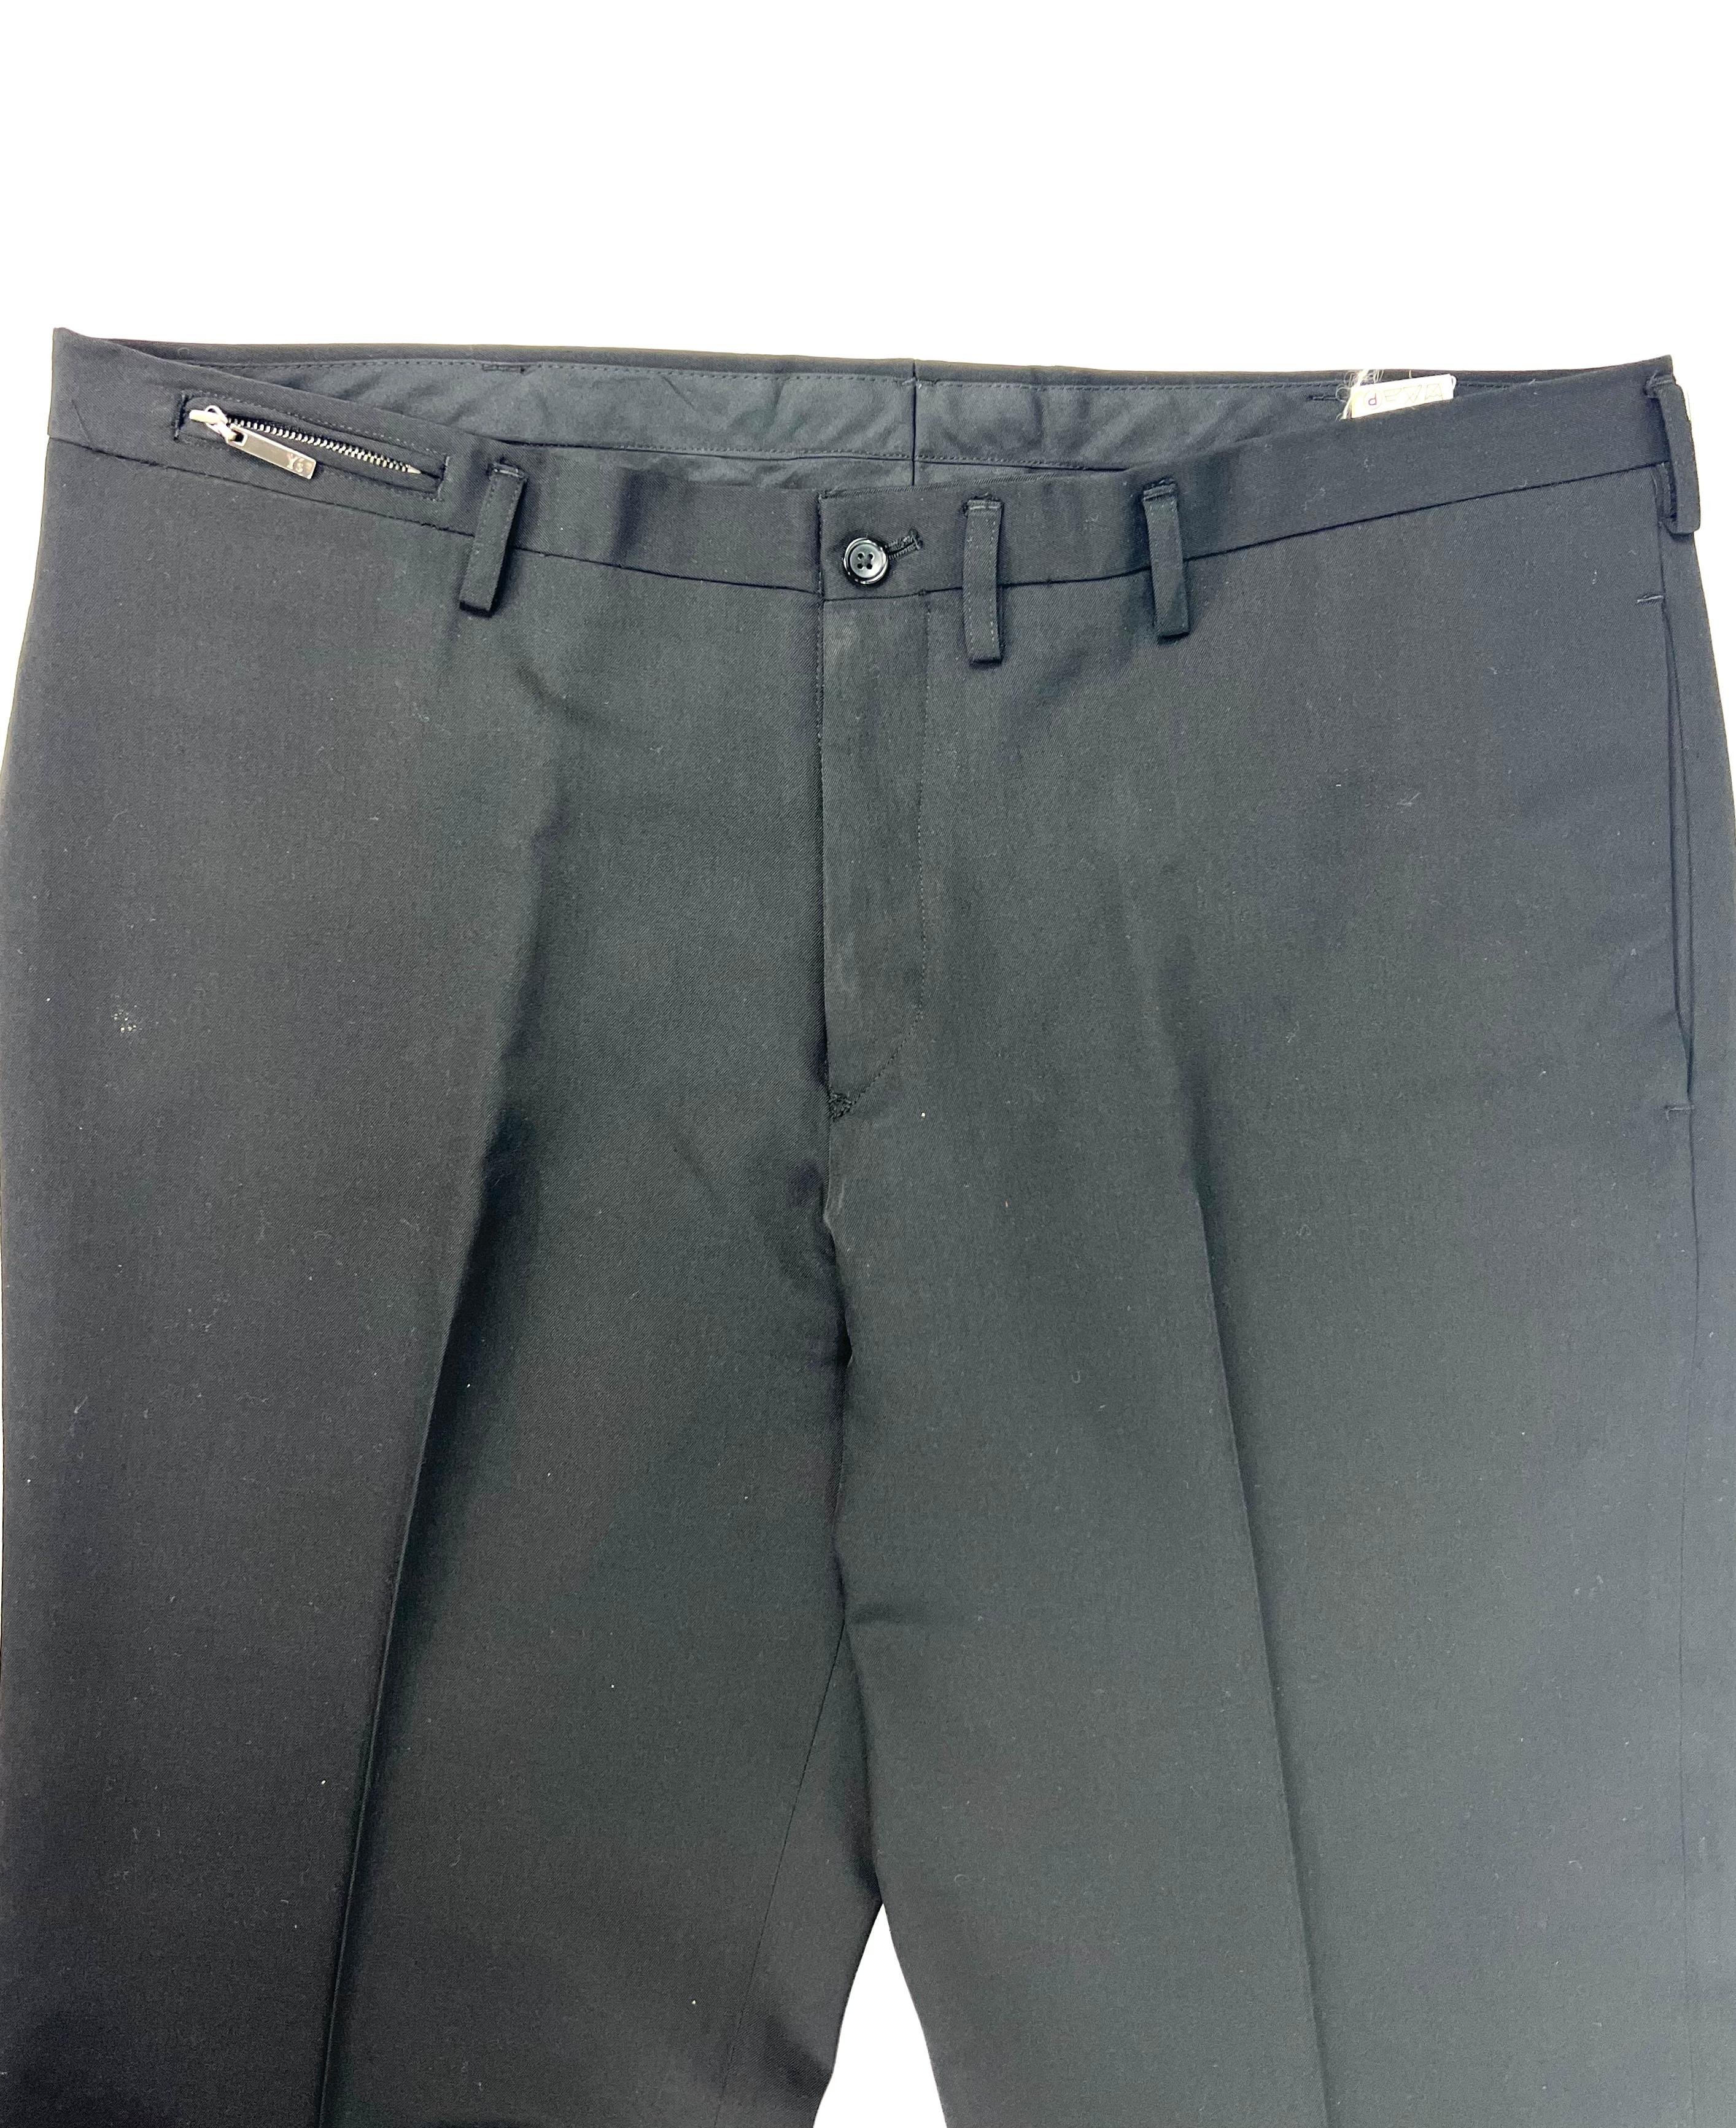 Product details:

The pants feature straight fit with side and rear pockets. Made in Japan.